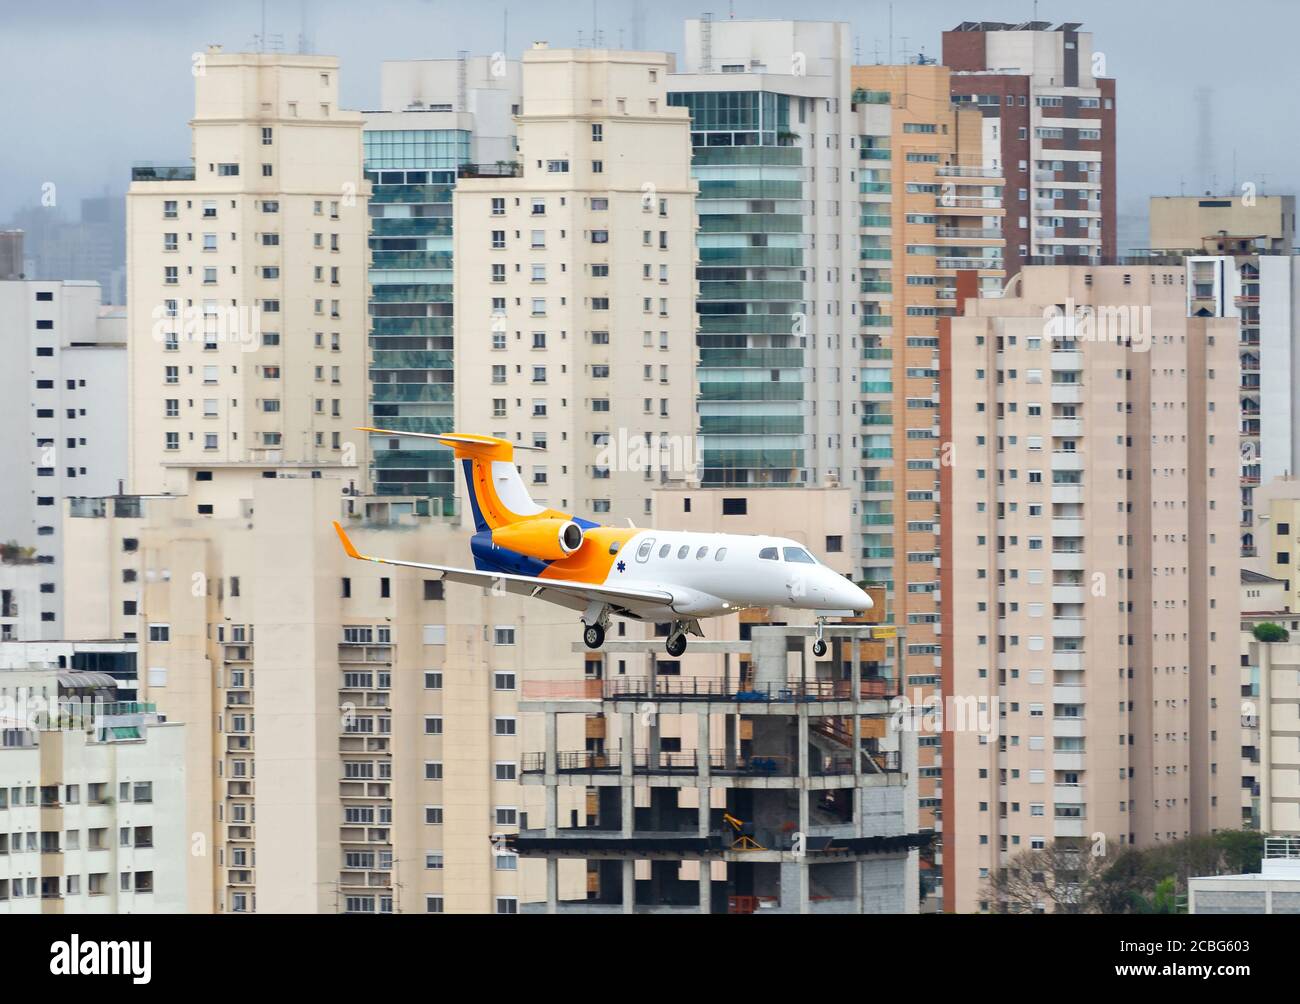 Embraer Phenom 300 landing in Congonhas Airport with Sao Paulo buildings behind. Business jet aircraft at centrally located airport in Brazil. Stock Photo